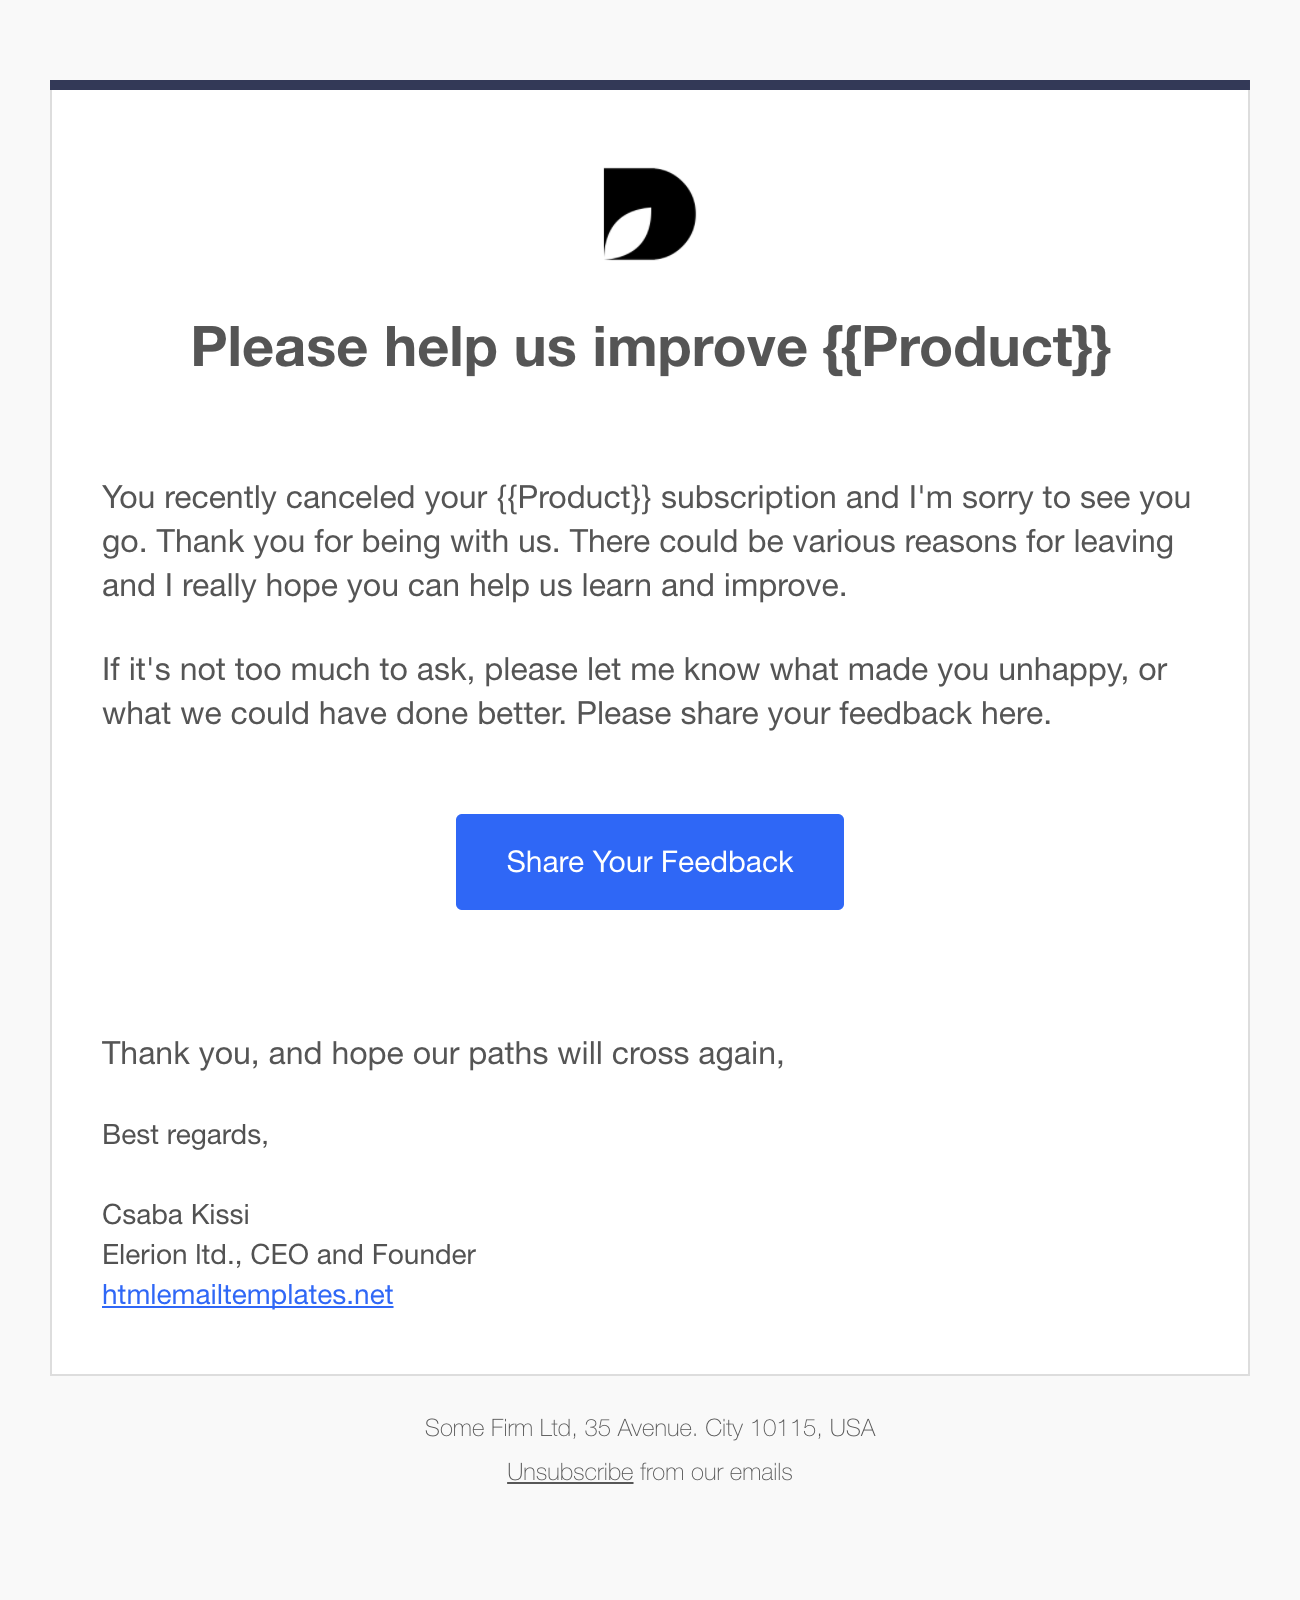 Free HTML Email Templates for SaaS and Startups